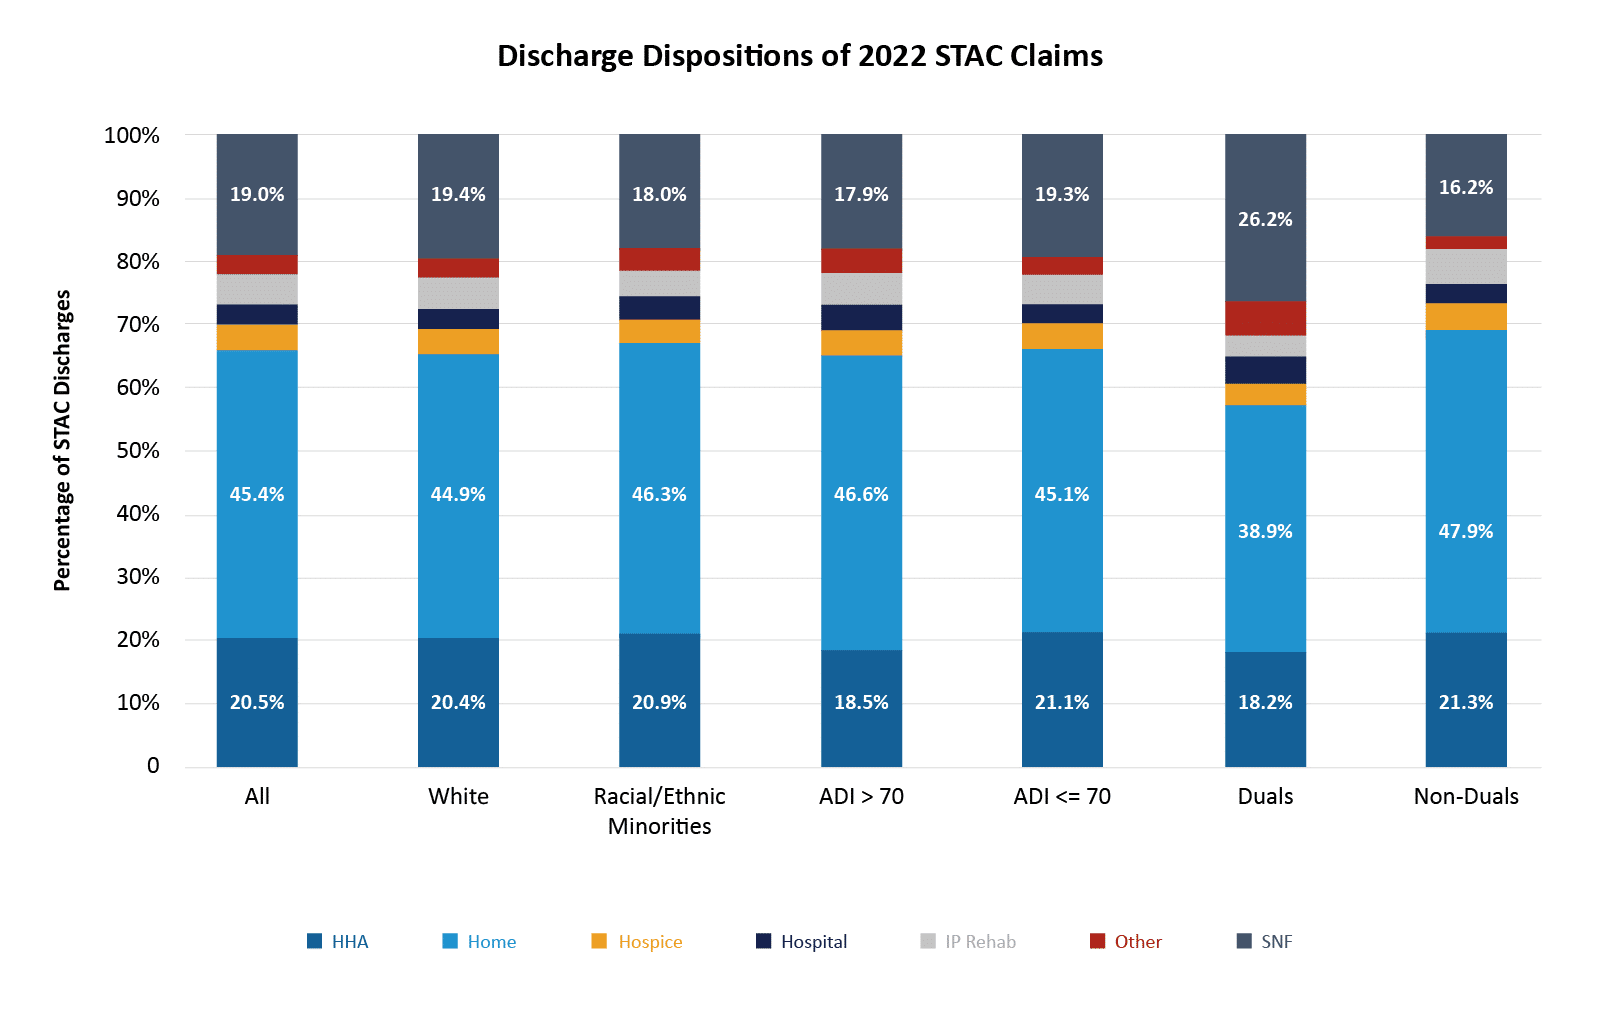 Discharge Dispositions of 2022 STAC Claims